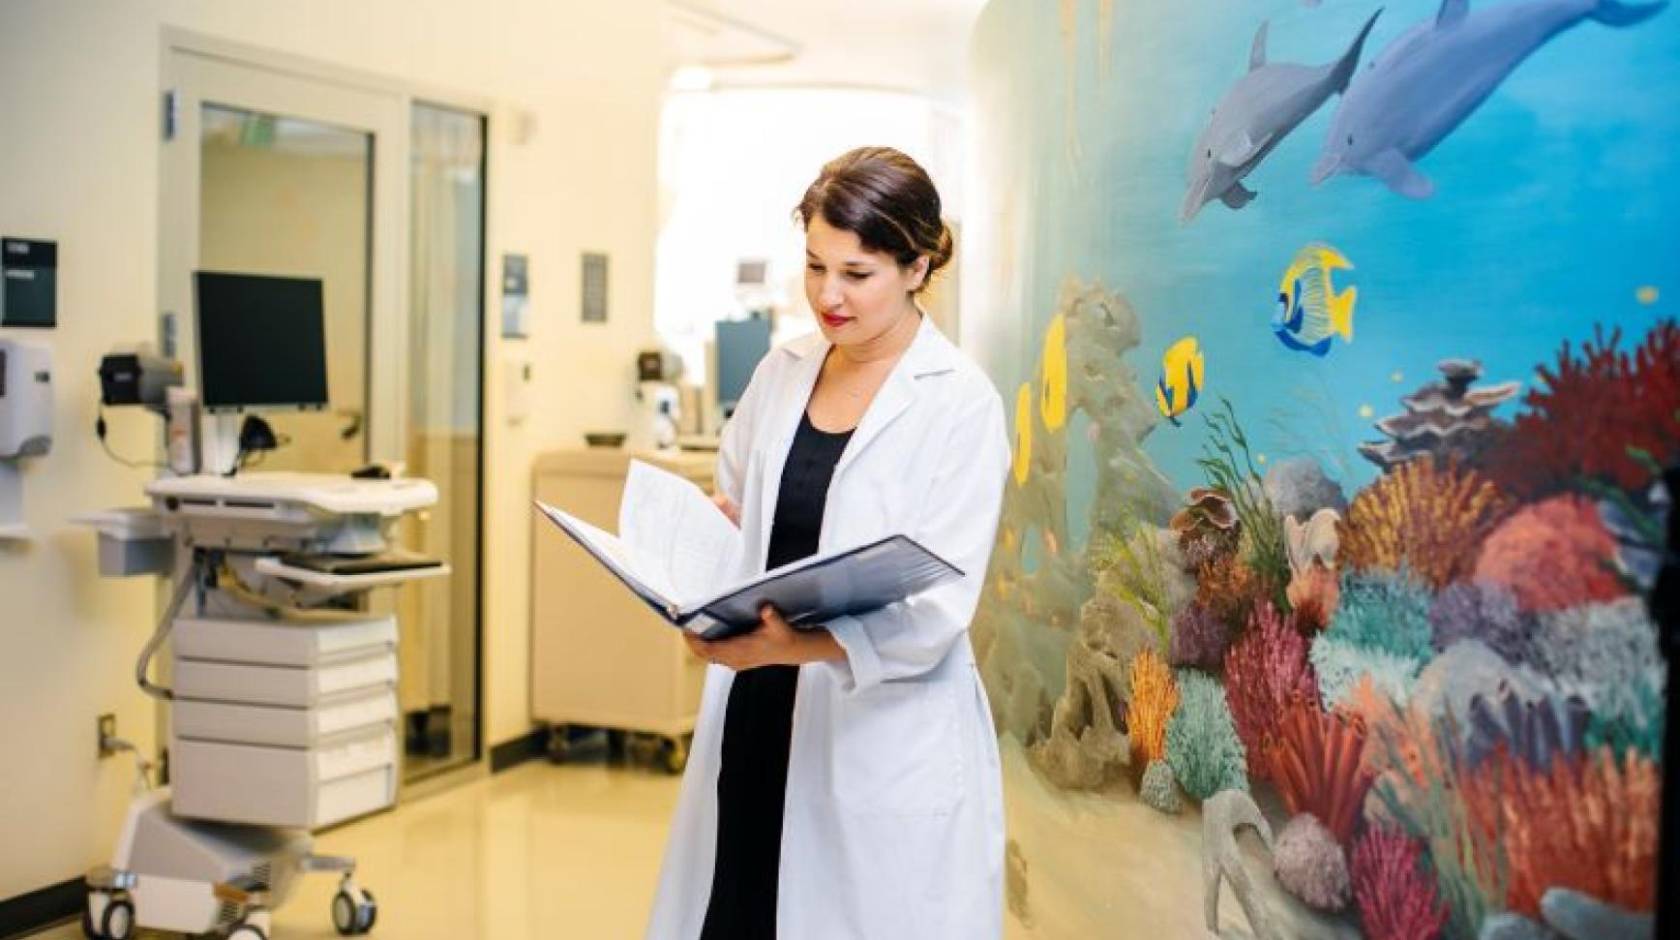 Woman doctor in white coat looks at a medical record with a colorful wall with an undersea mural behind her